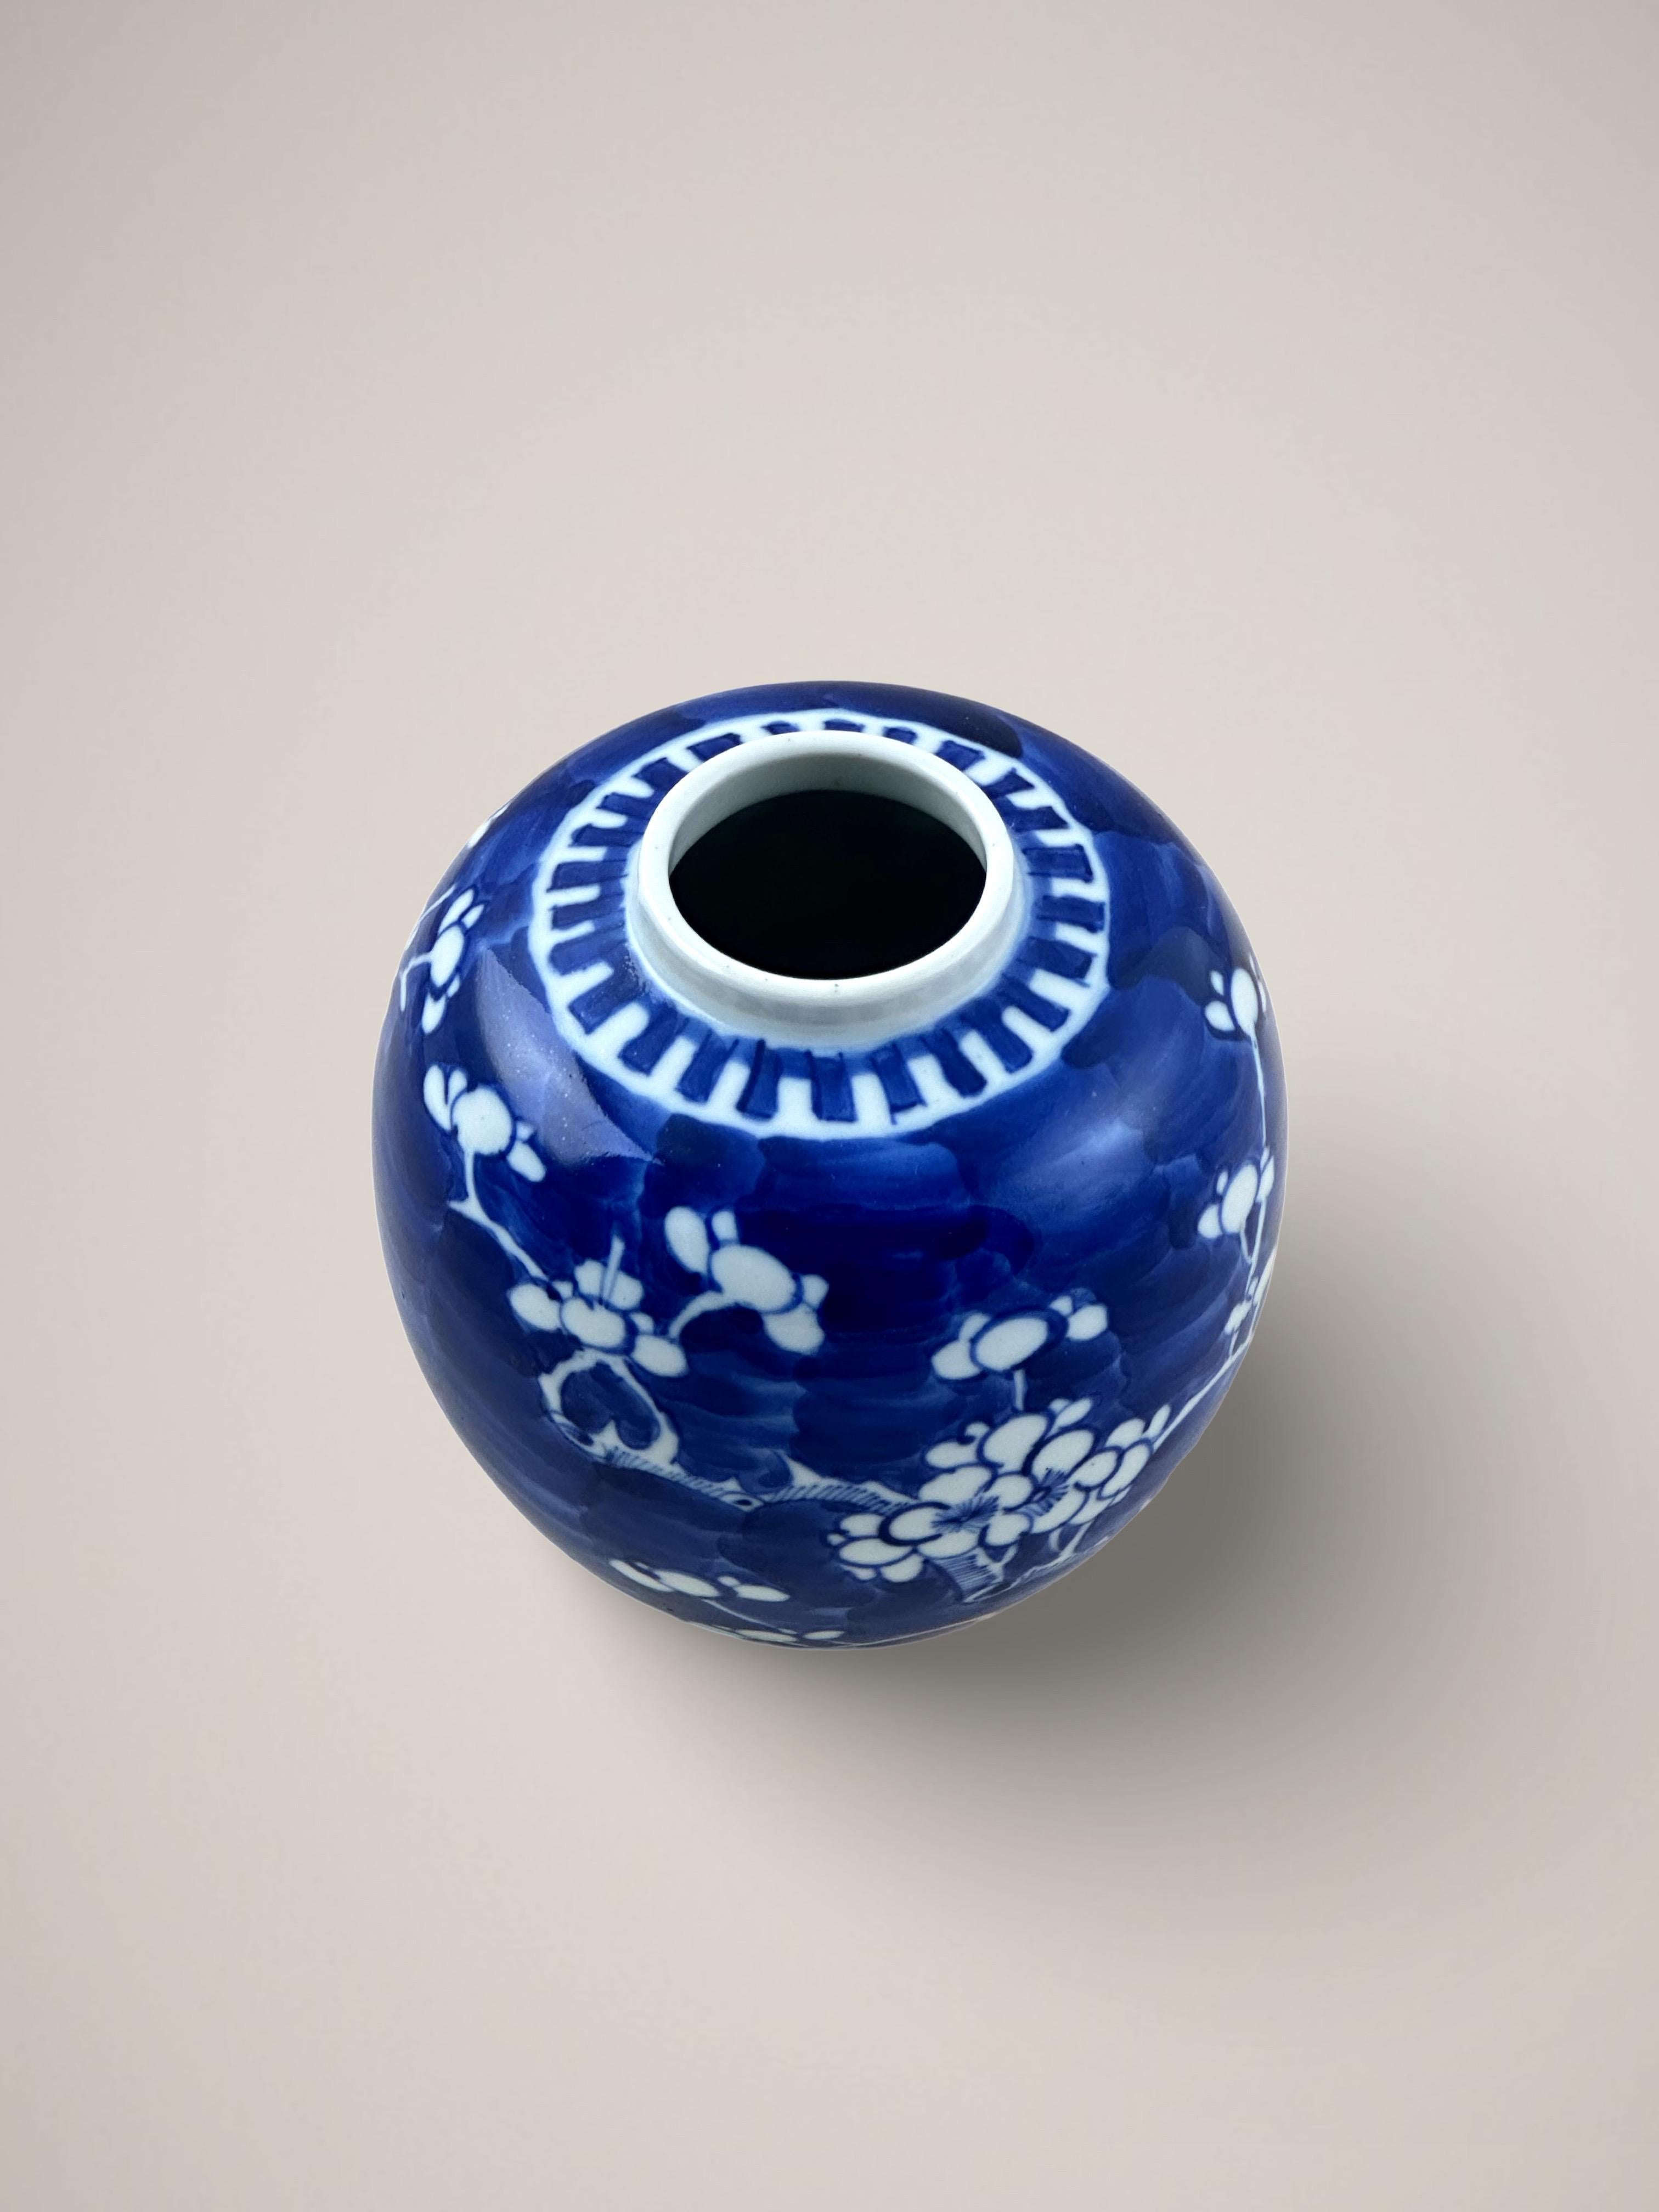 Antique Chinese ginger jar, crafted in the late 19th century during the Qing dynasty. 

Hand painted in blue enamels set against a white underglaze porcelain. Decorated and adorned with a 'Kangxi' style prunus tree, depicted against a sky of deep